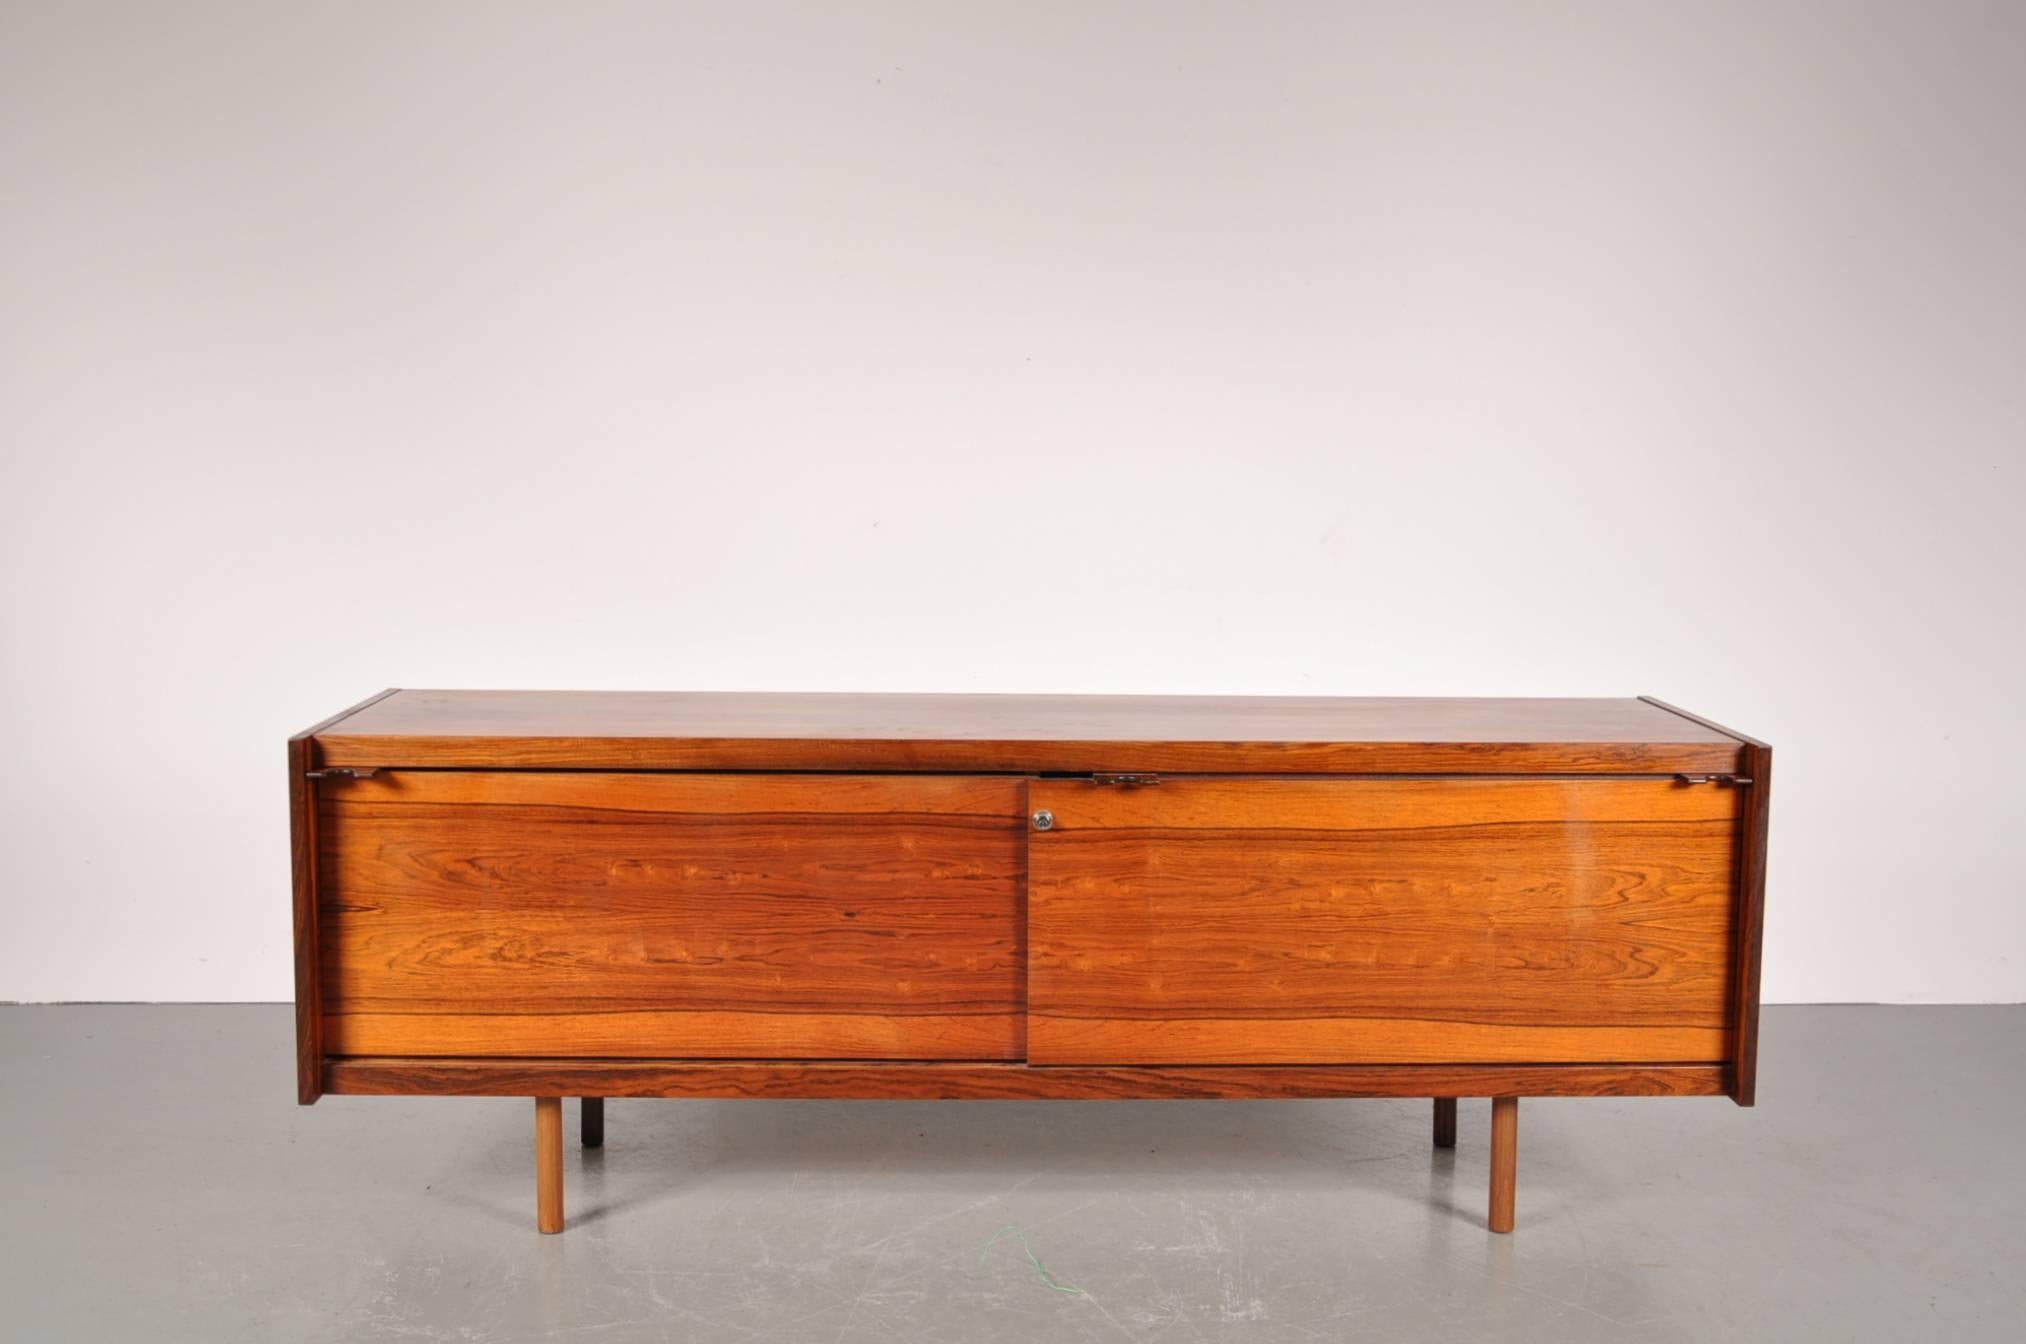 Stunning rosewood sideboard by Sven Ivar Dysthe, manufactured by Dokka Mobler in Norway around 1960.

The sideboard is made of beautiful quality rosewood with two sliding doors, revealing several shelves and drawers.

In good original condition